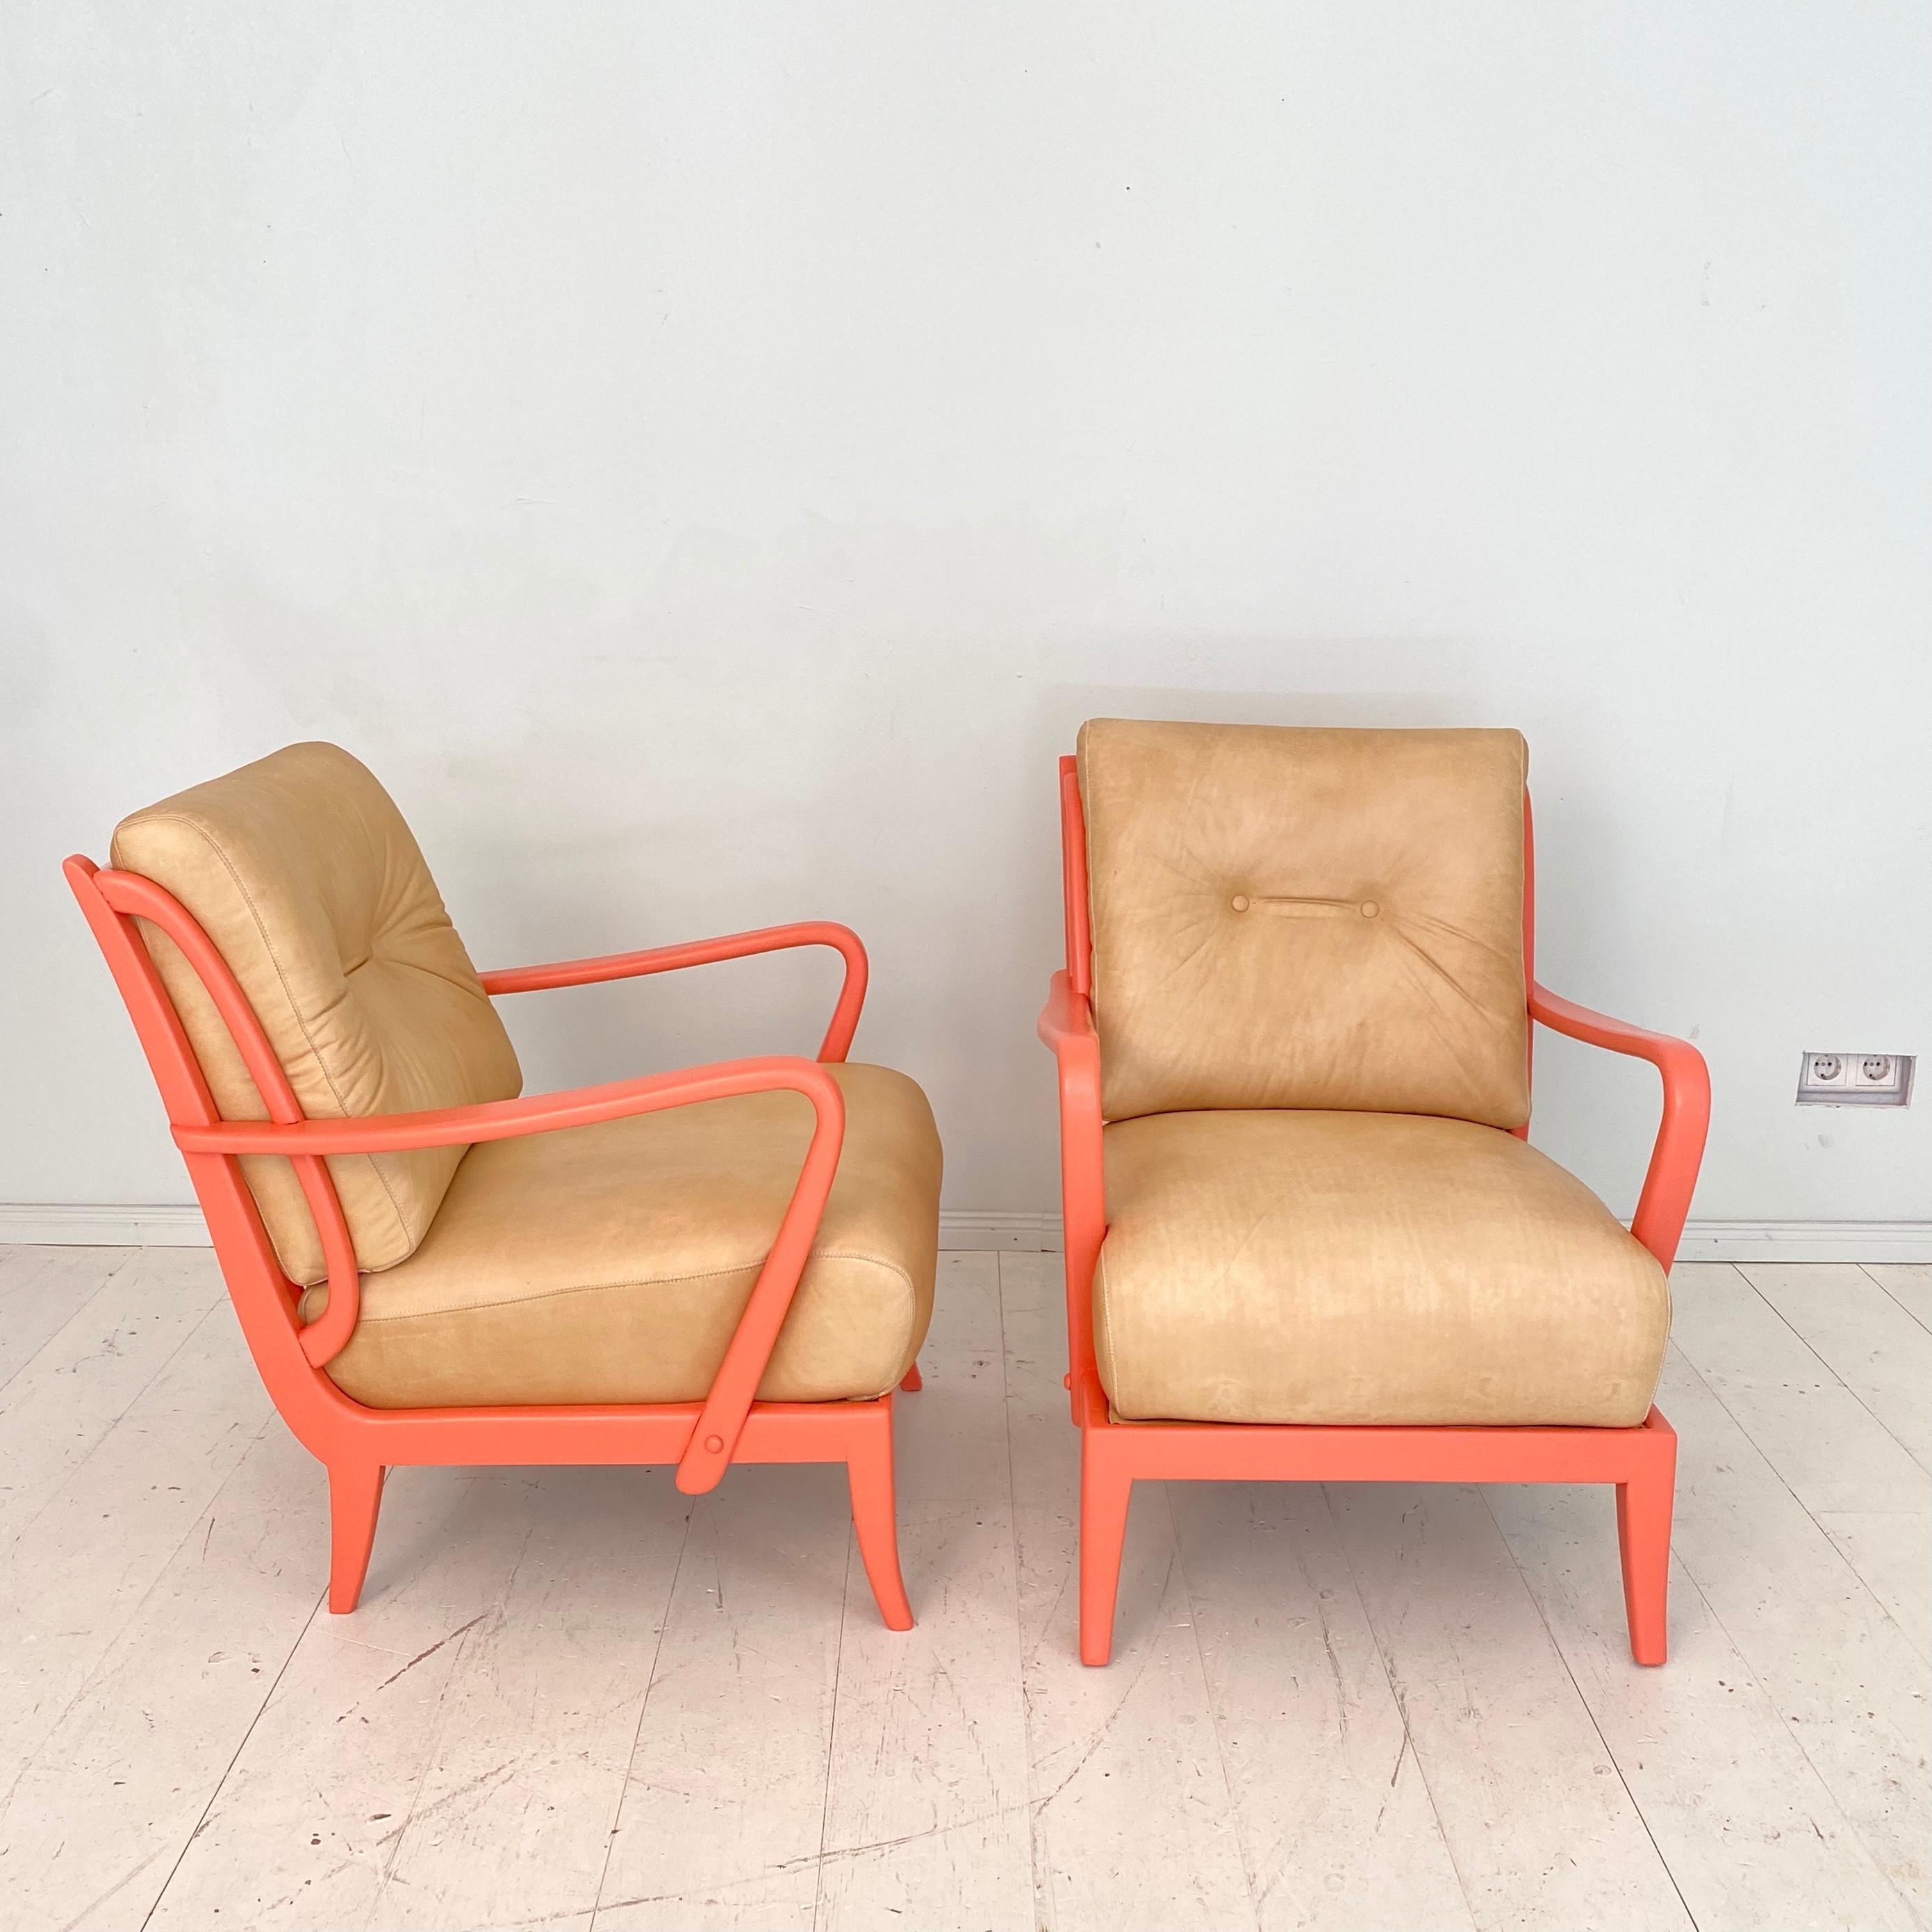 Mid-Century Modern Pair of Italian Mid Century Lounge Chairs in Coral Color and Beige Leather, 1950